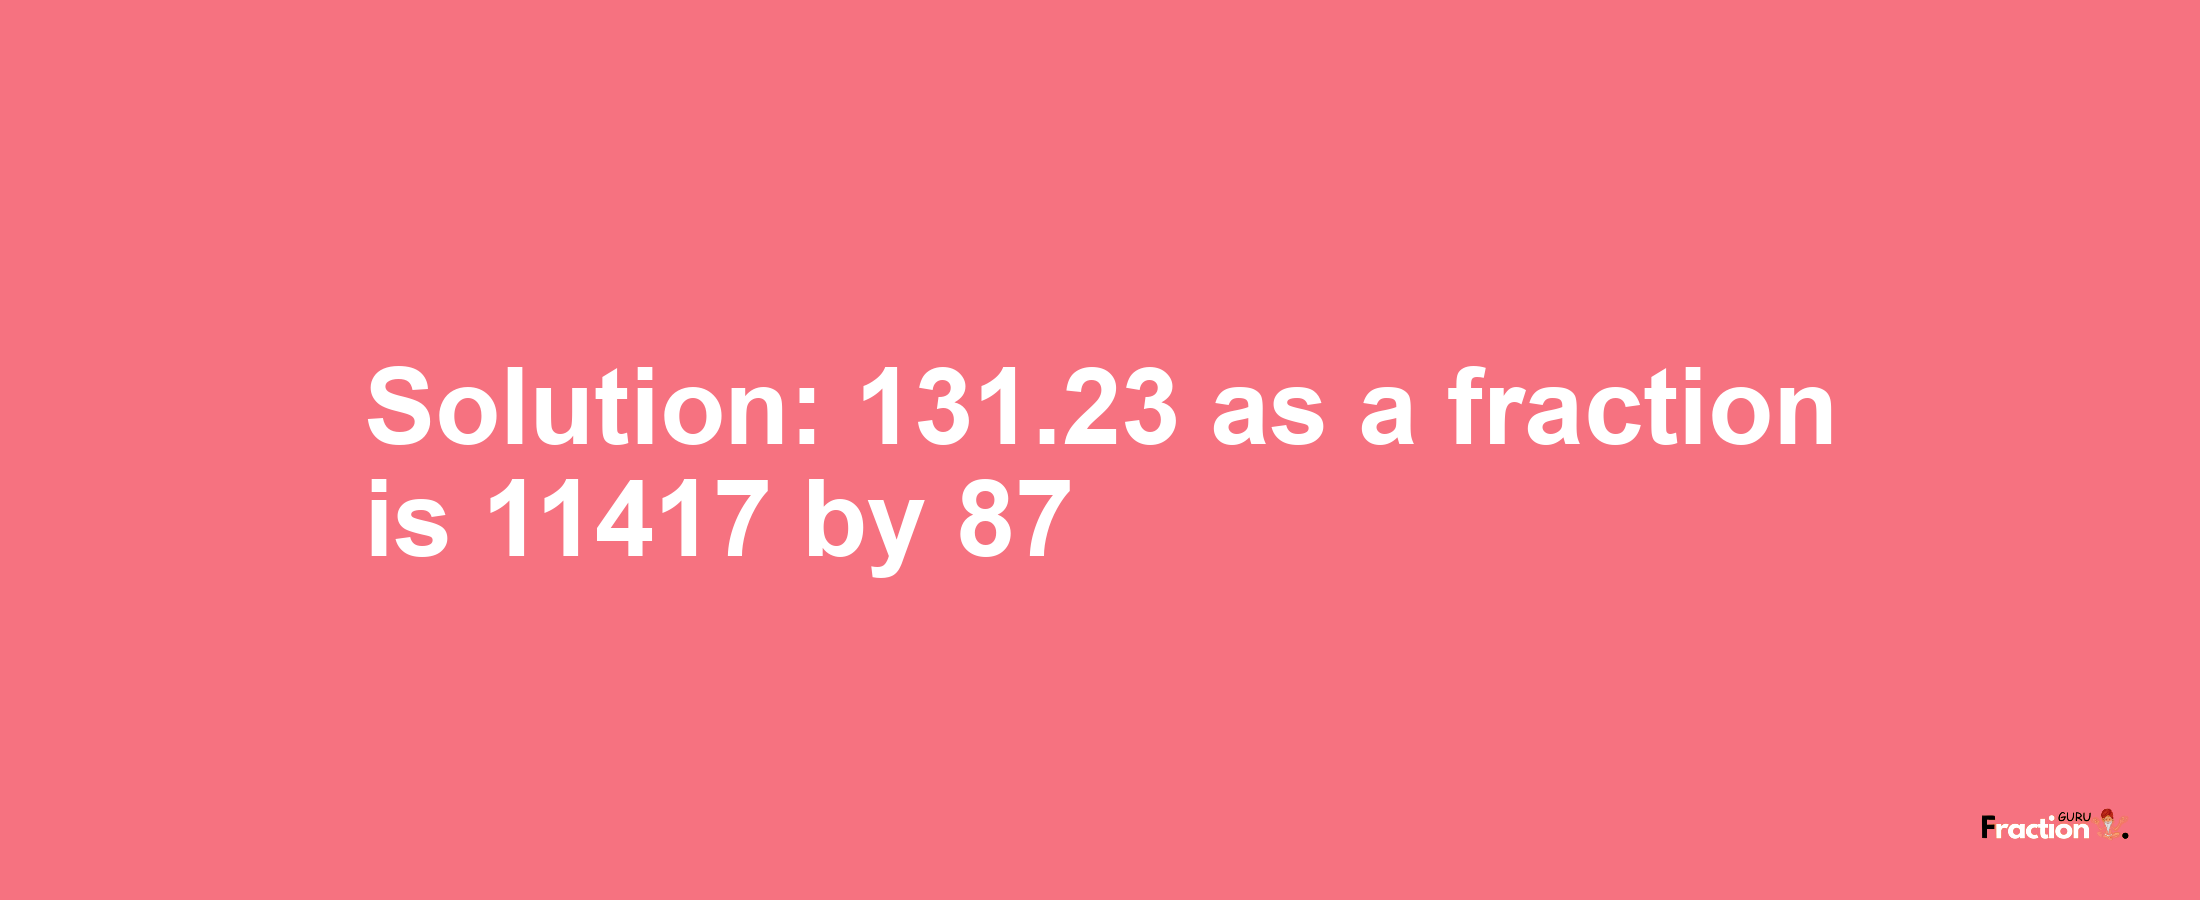 Solution:131.23 as a fraction is 11417/87